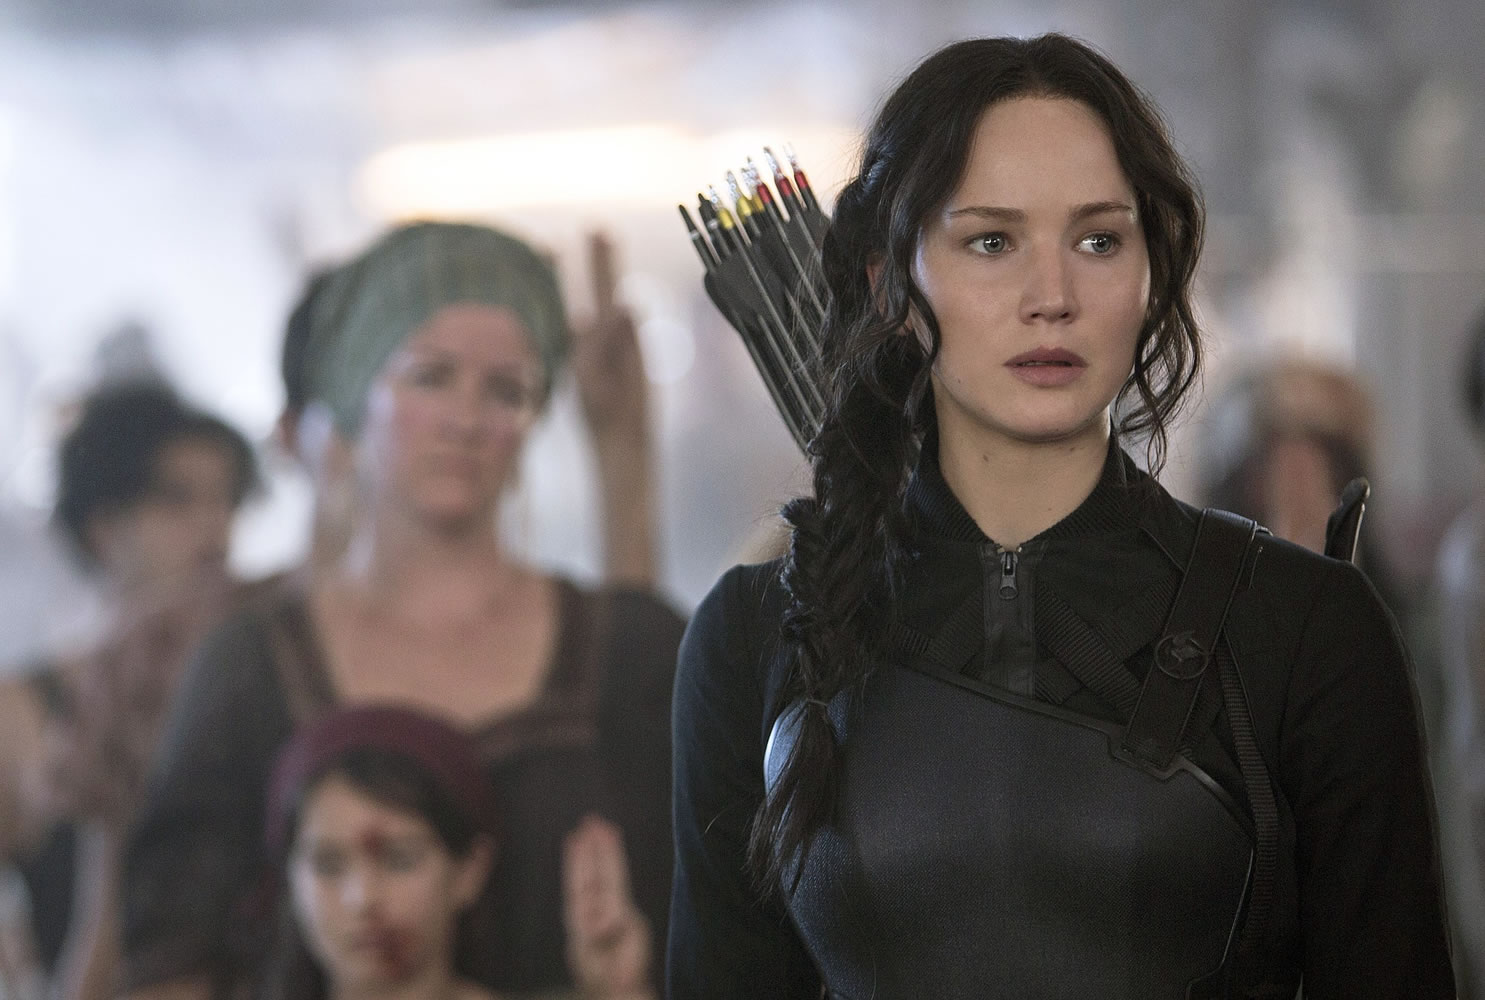 Jennifer Lawrence removed from 'The Hunger Games: Mockingjay